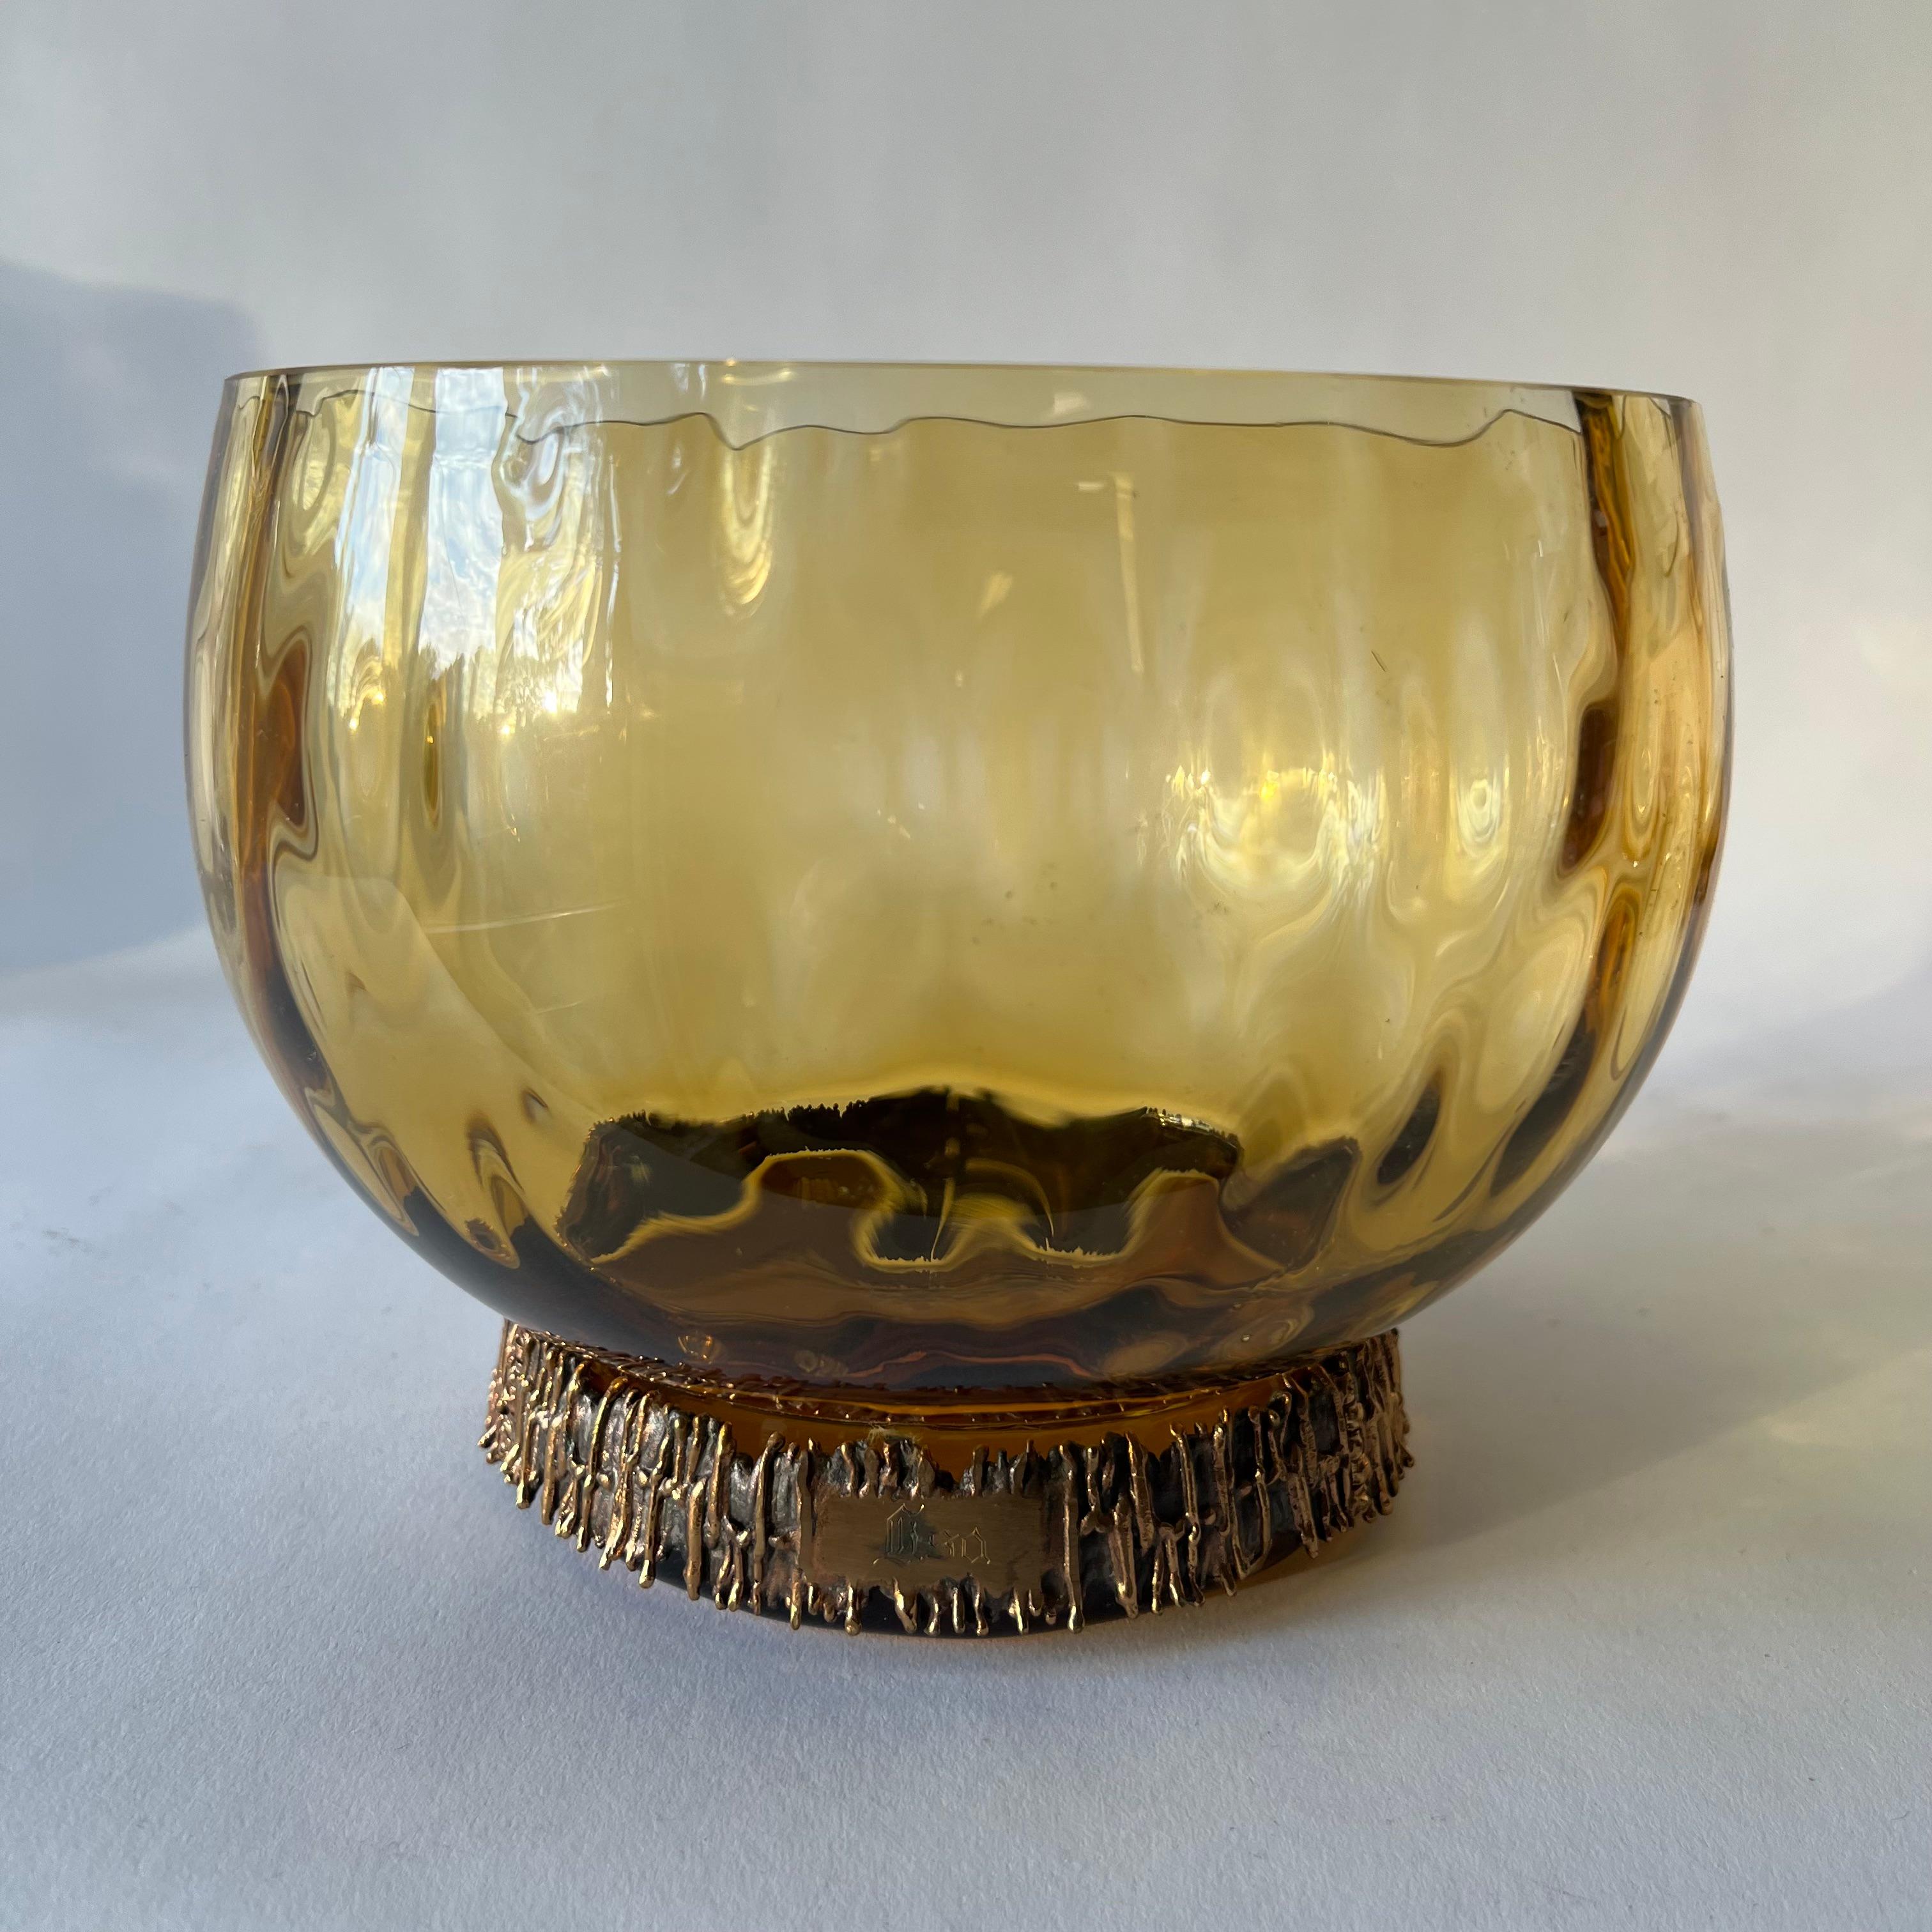 Punch bowl with ladle, cups and cream and sugar set designed and created by Pentti Sarpaneva for Turun Hopea, circa 1960's.  Mold blown glass with polished edges, bronze foot and handles.  All are monogrammed with the name 'Lisa' on a bronze plaque